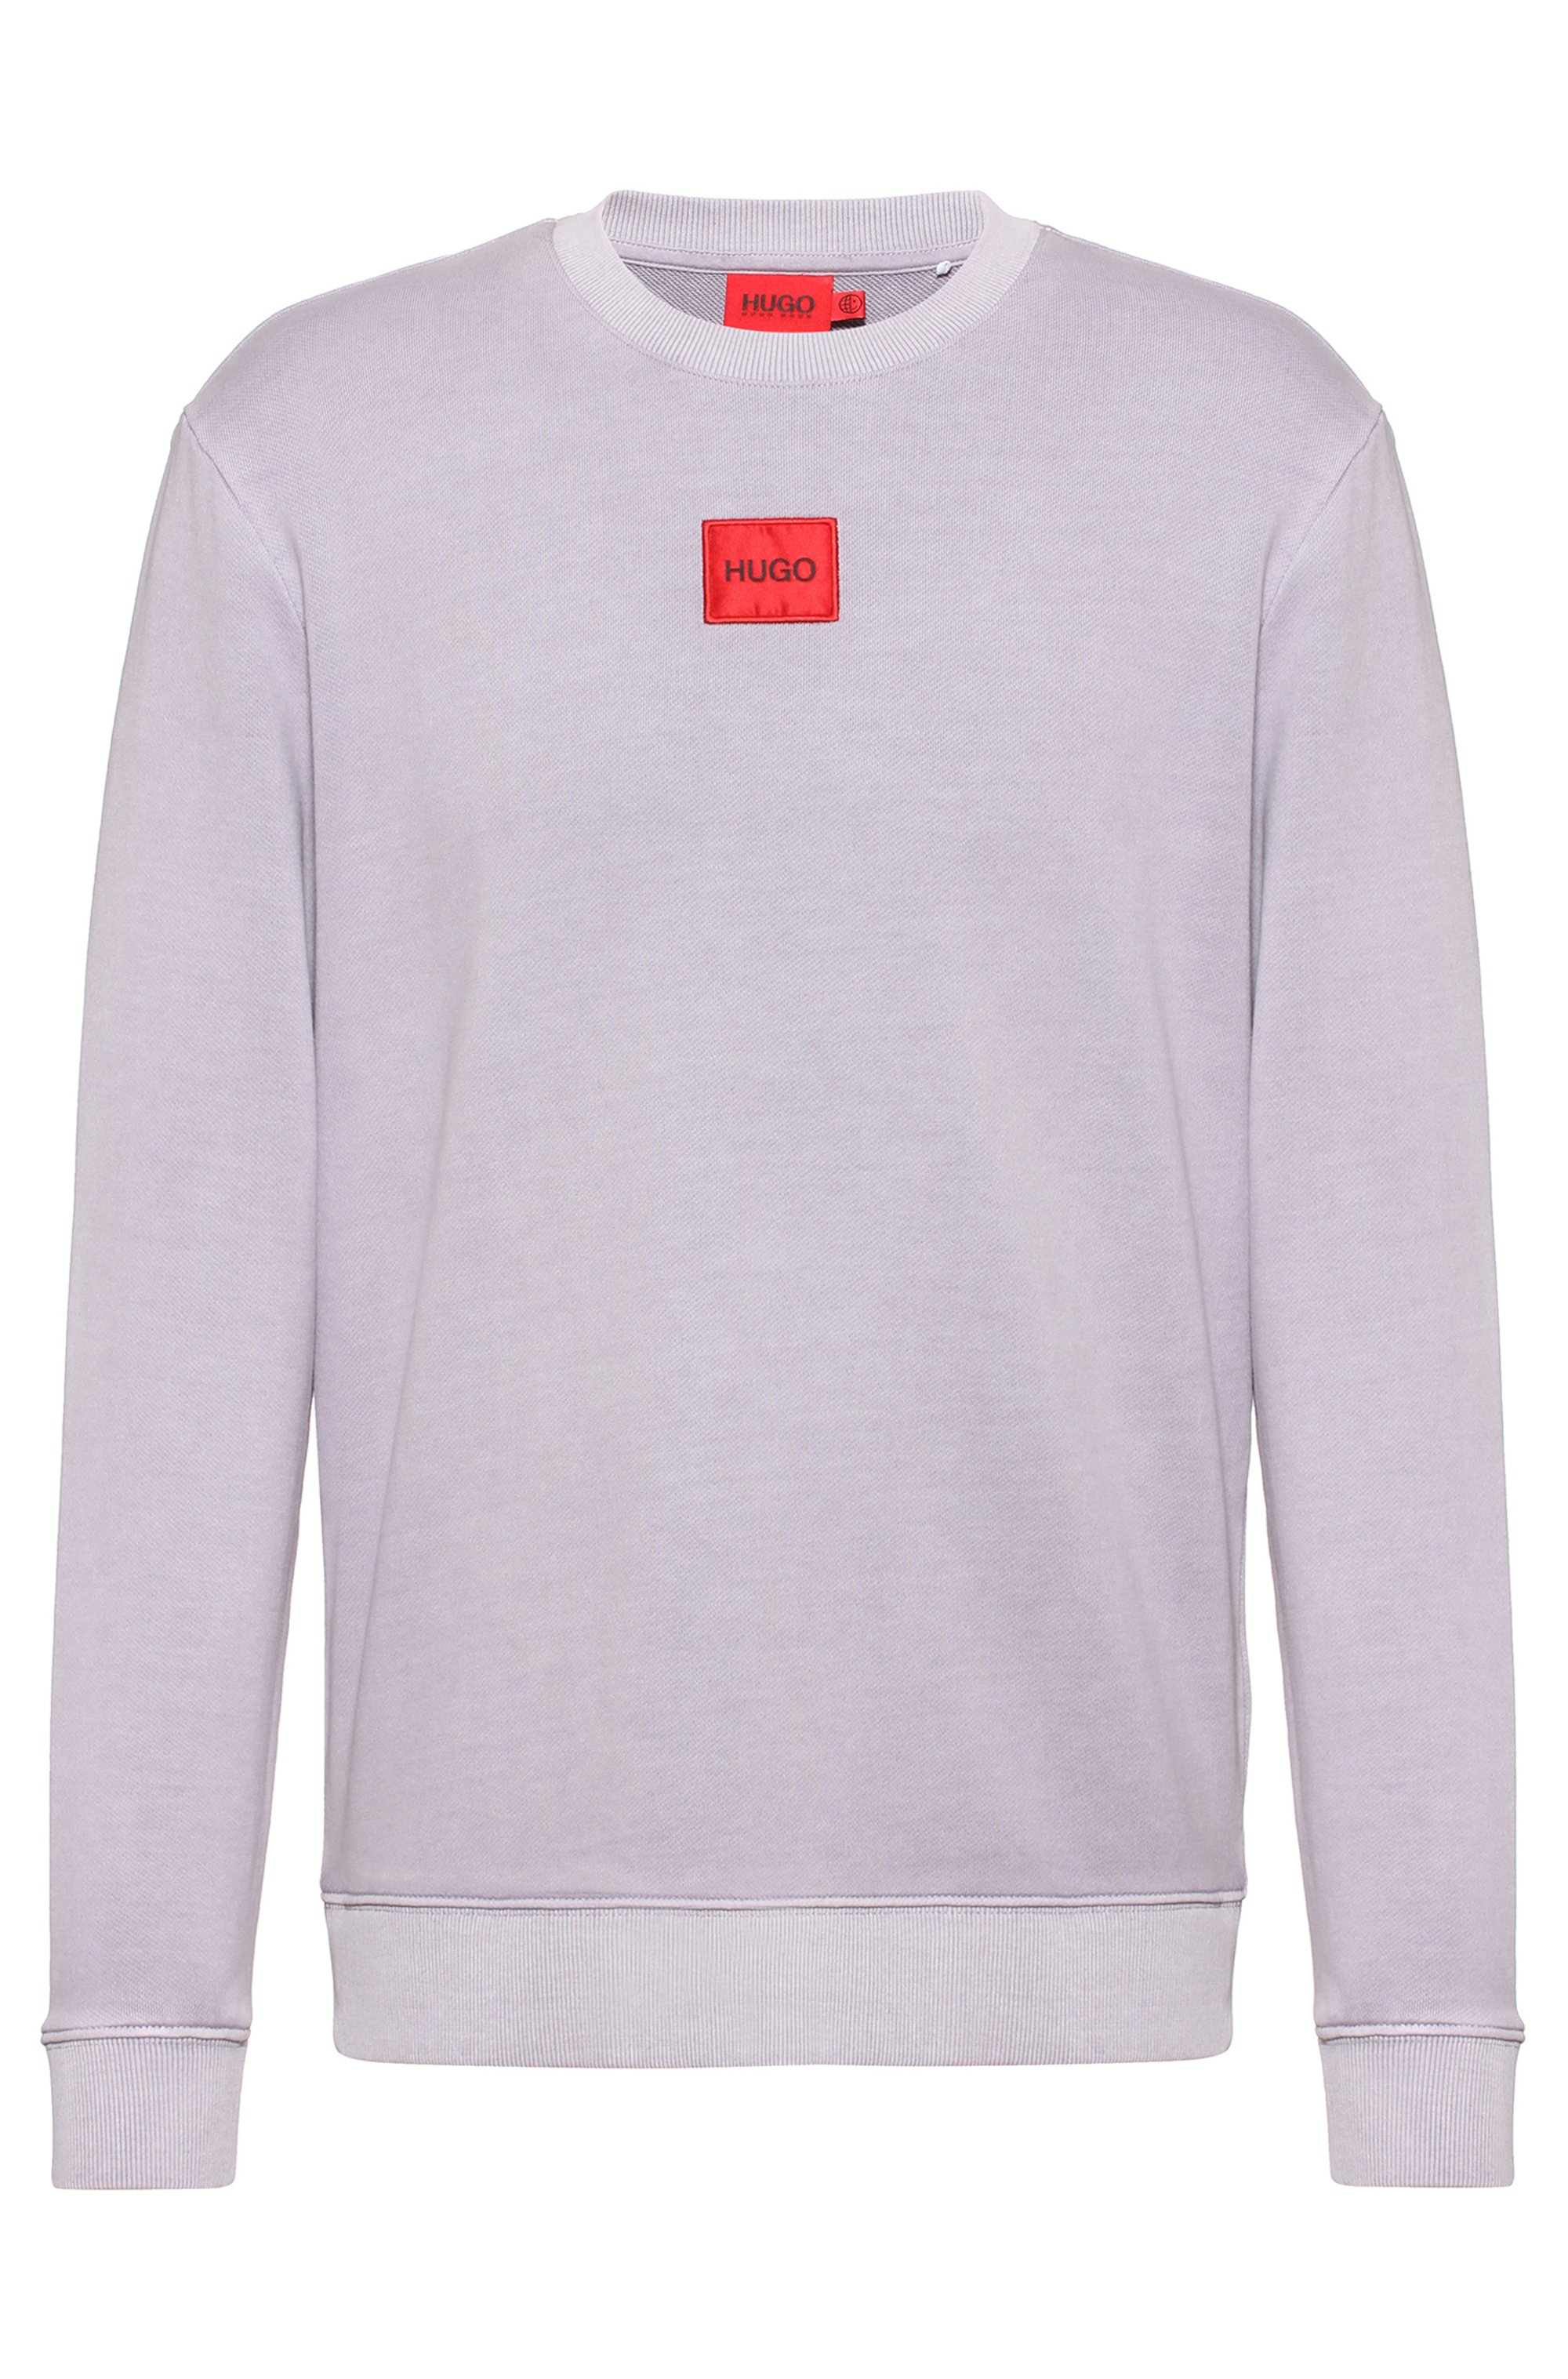 French-terry cotton sweatshirt with red logo label, light pink